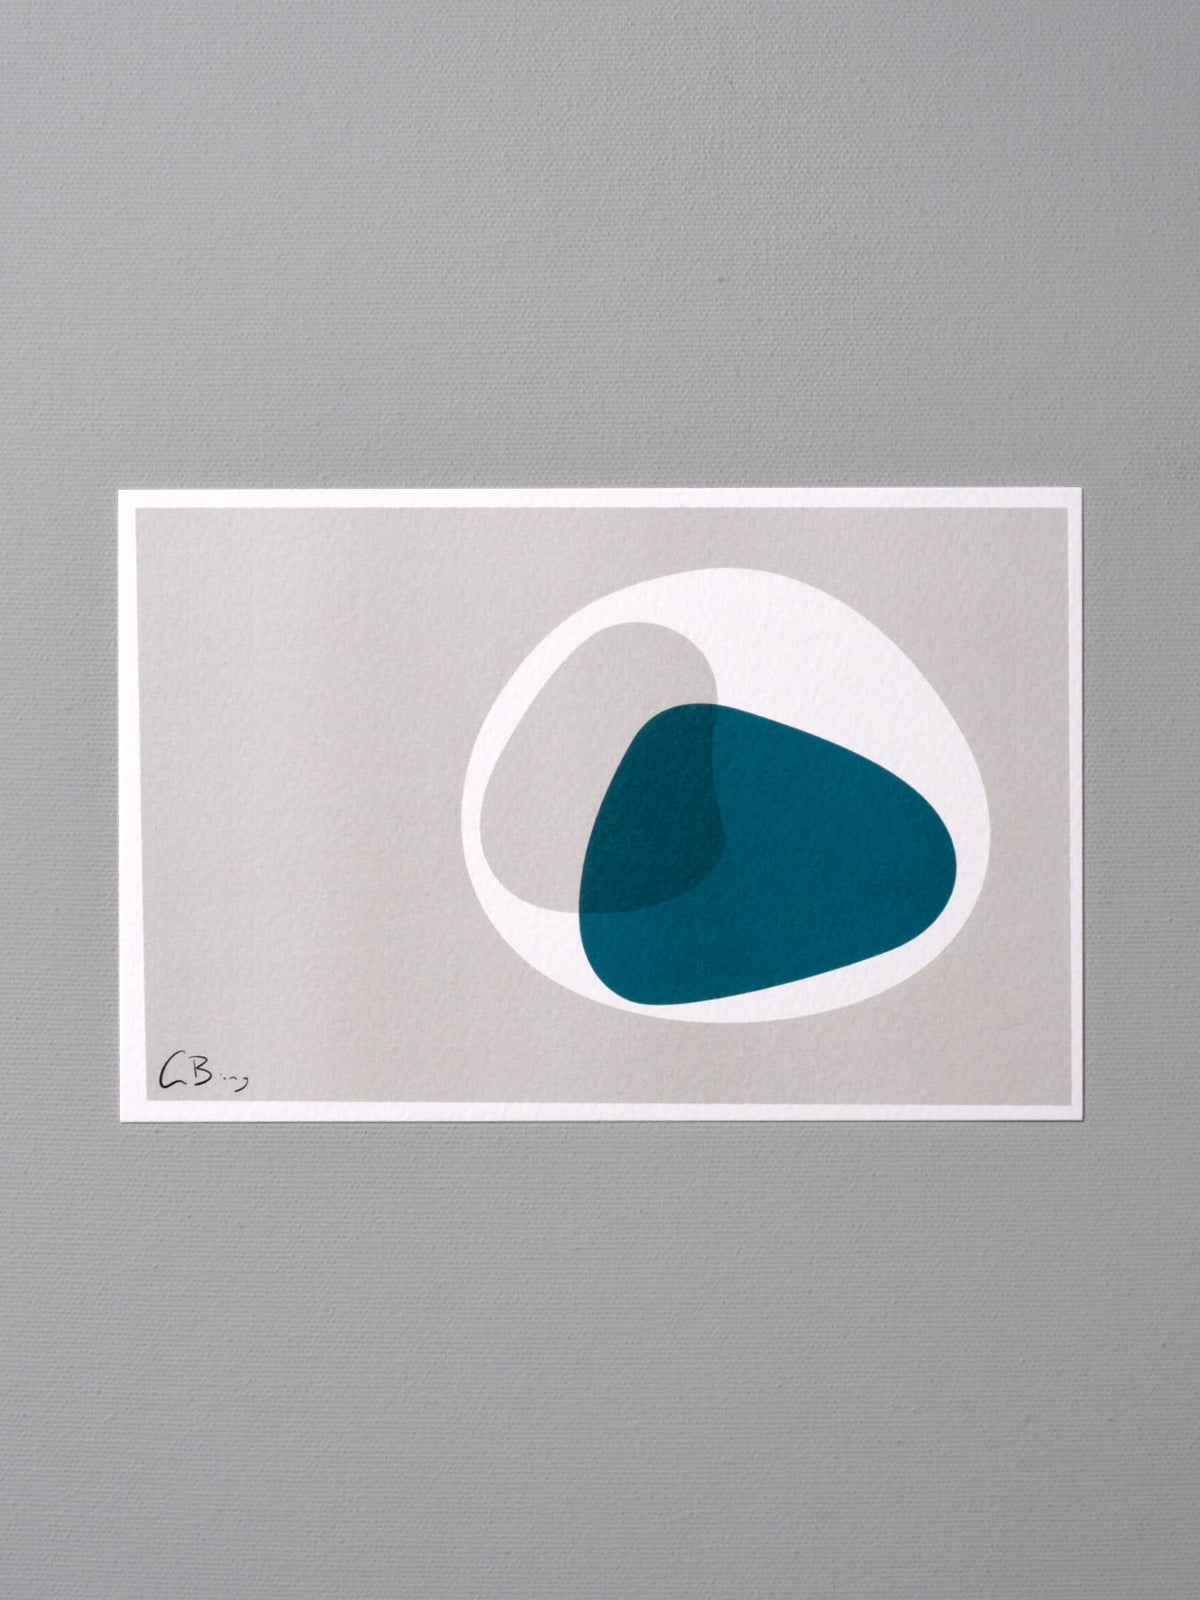 A blue and white Postcard Print - Metaphase by Gidon Bing on a gray wall.